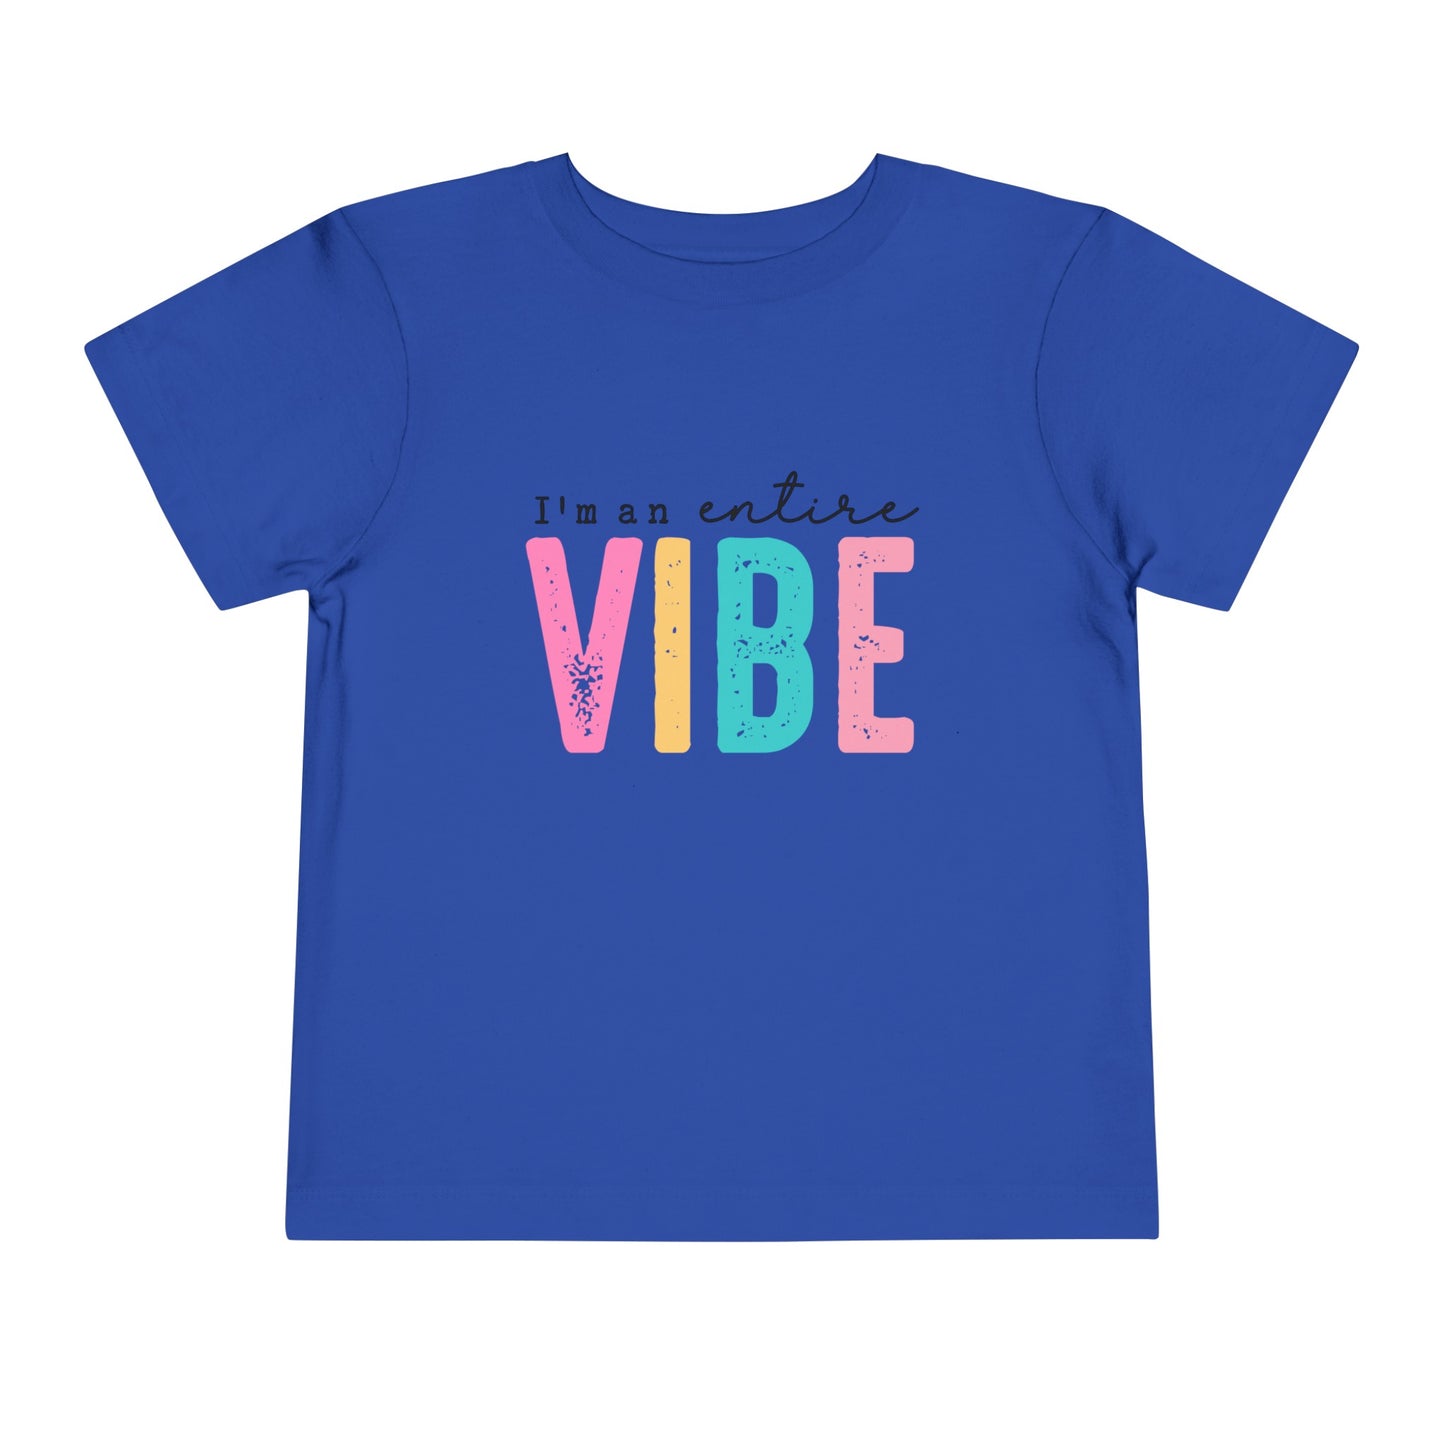 I'm an Entire Vibe Funny Girl's Toddler Short Sleeve Tshirt